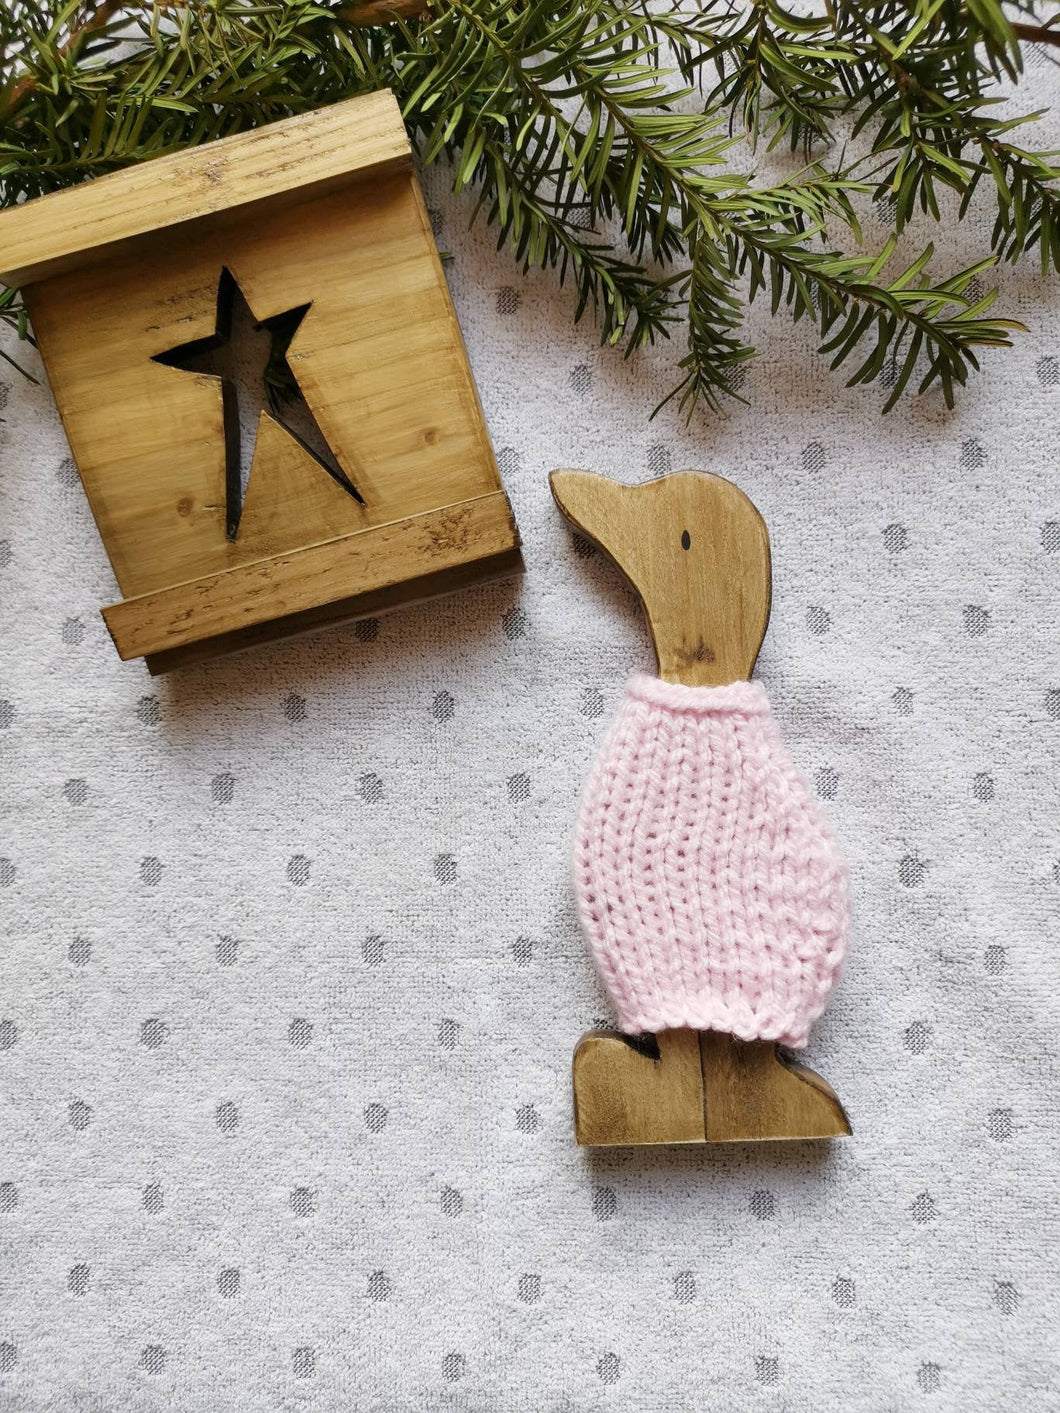 Wooden Duck with knitted wooly jumper, Letterbox gift, Wooden home decor gifts, Country decor,